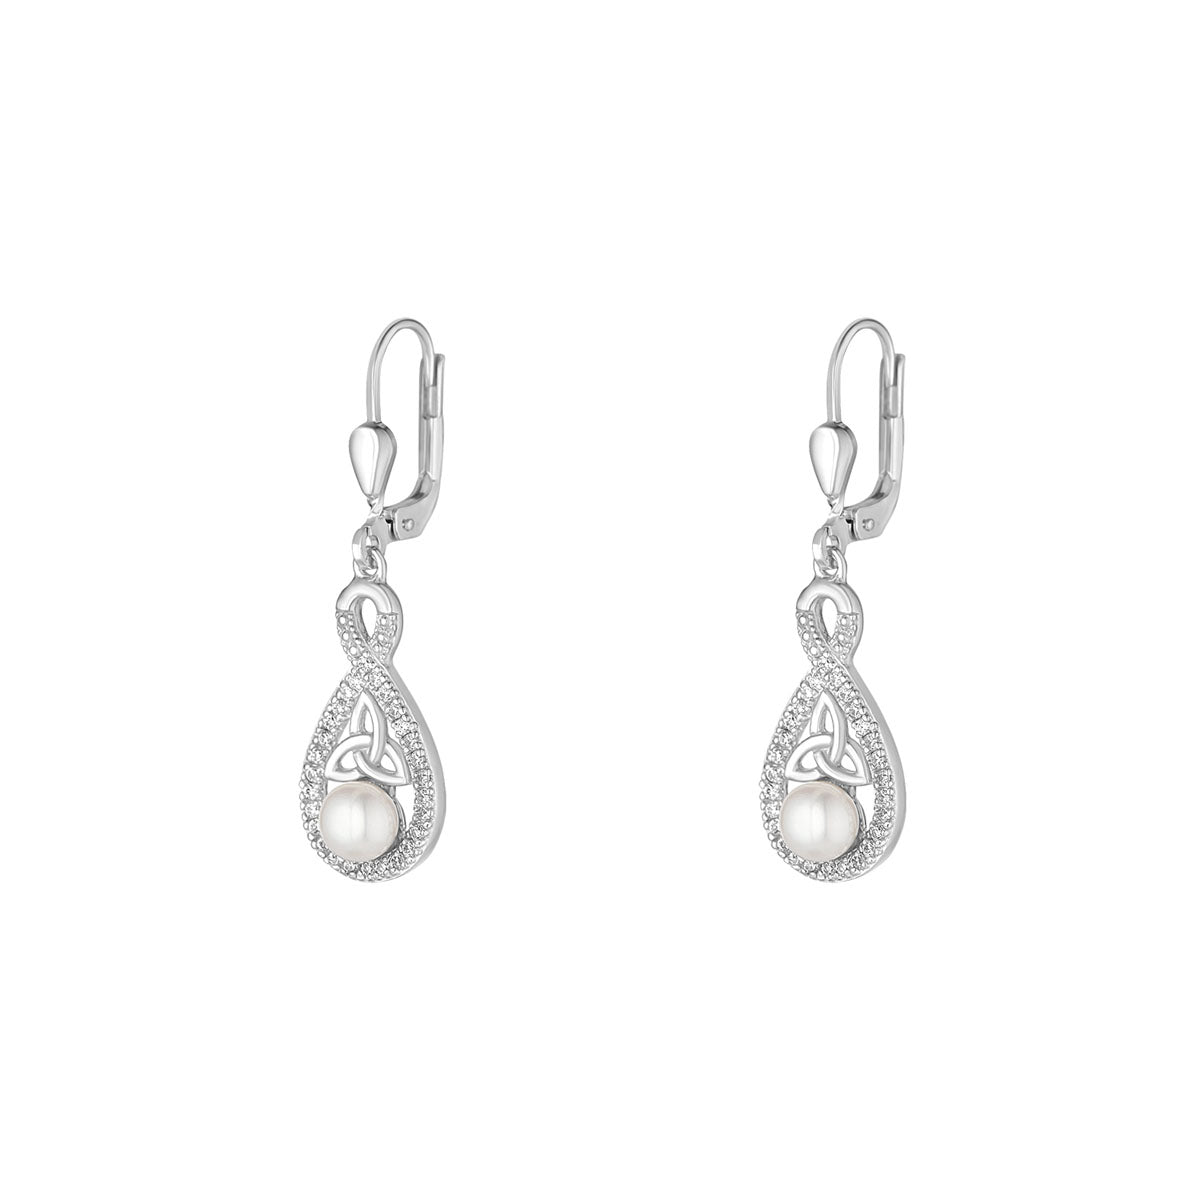 Solvar sterling silver crystal and pearl twisted trinity knot earrings S34152